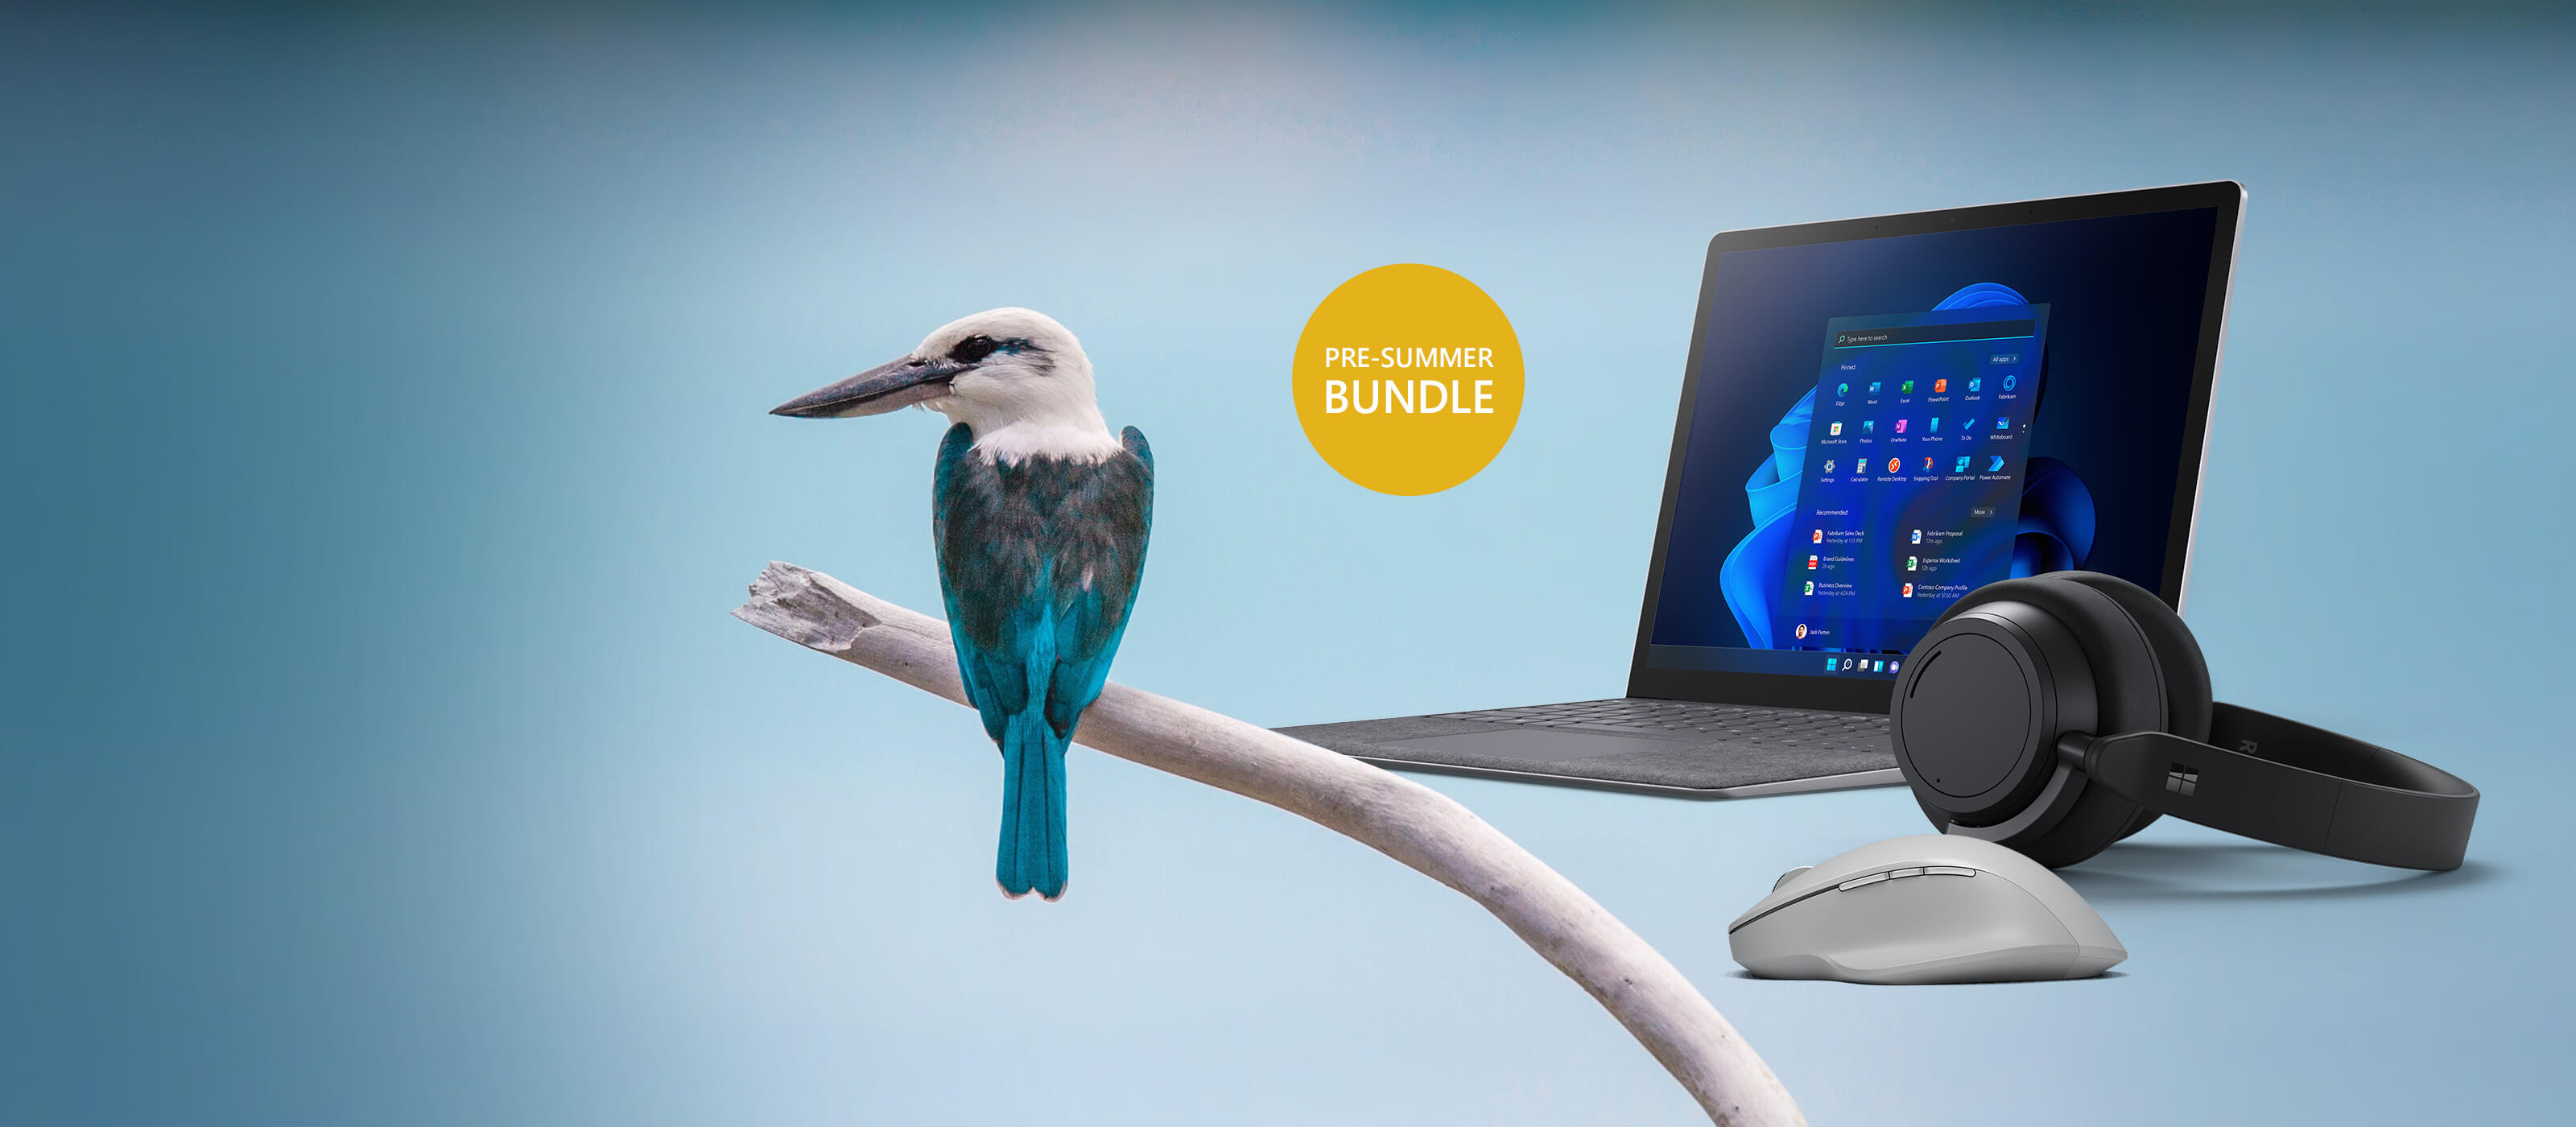 The Surface Laptop 4 is placed next to a bird against a blue background